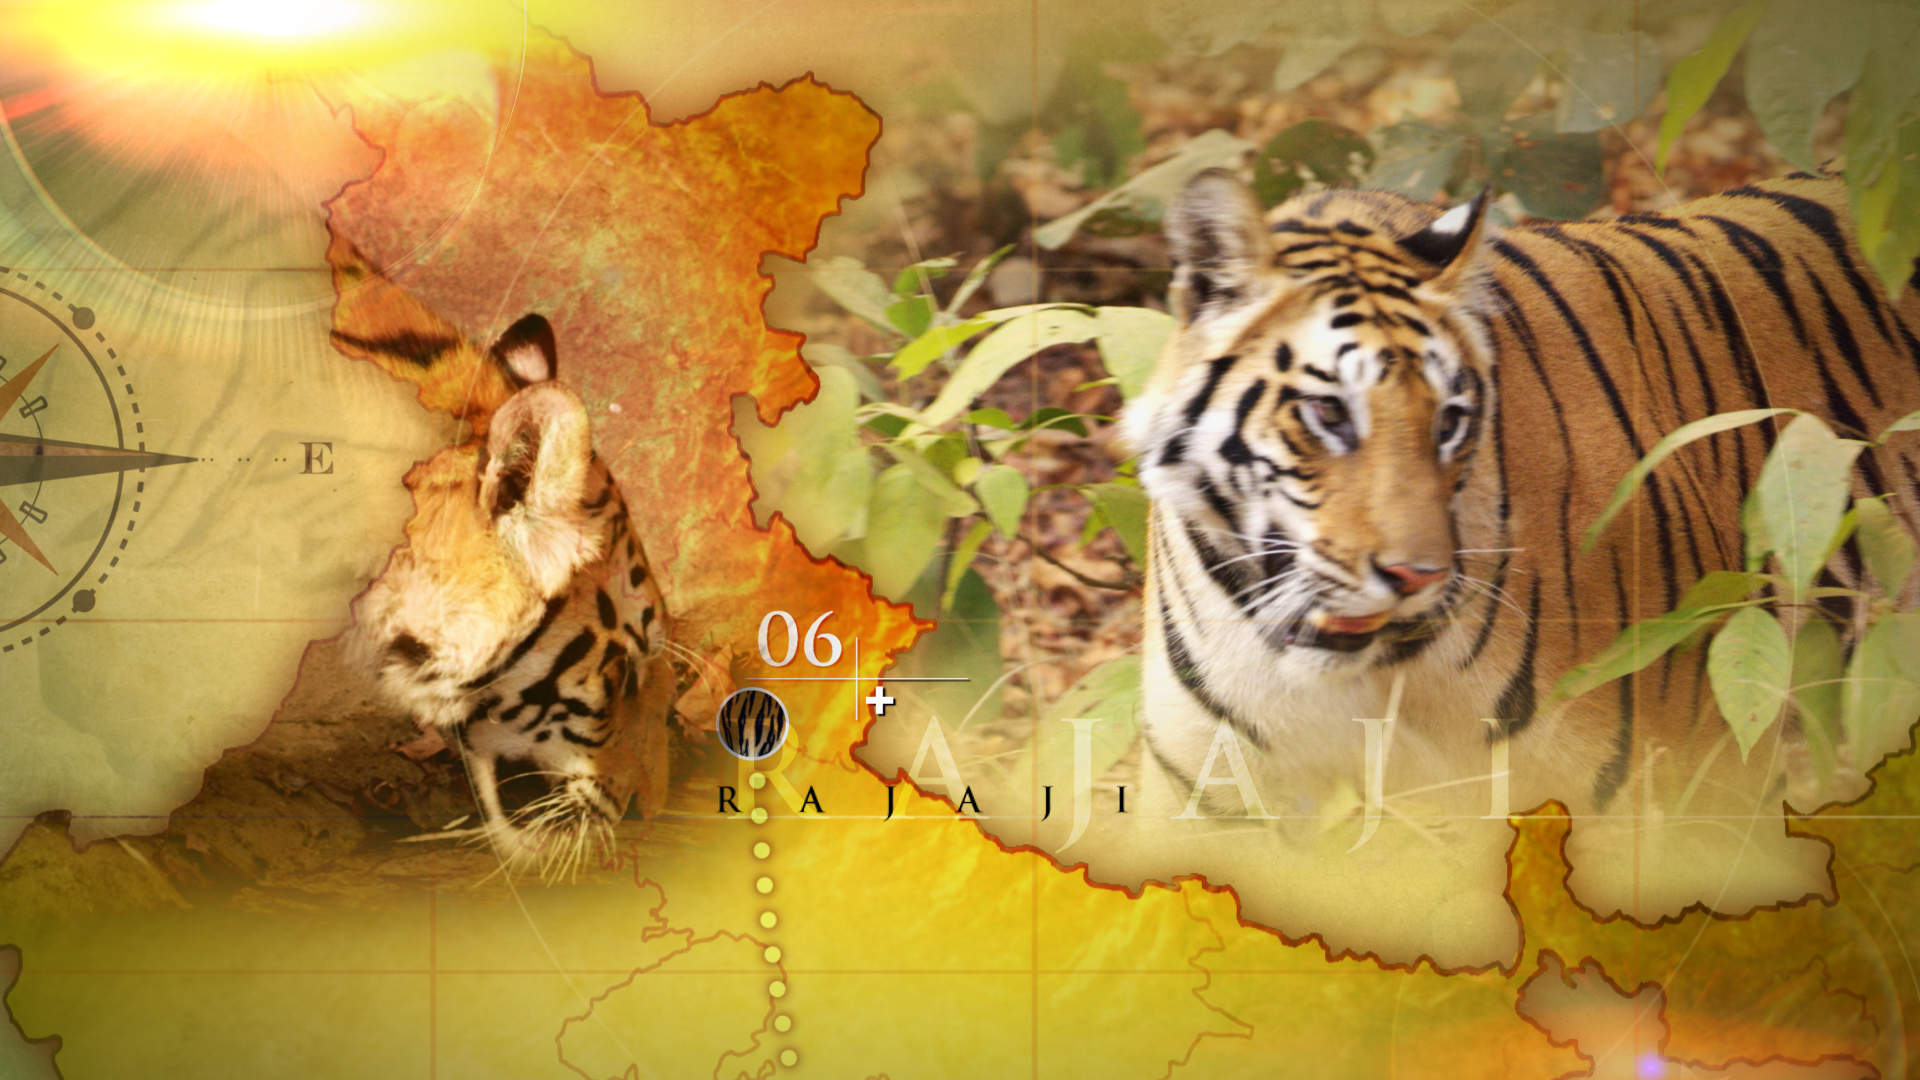 "Counting Tigers", Optimum TV for the Discovery Channel